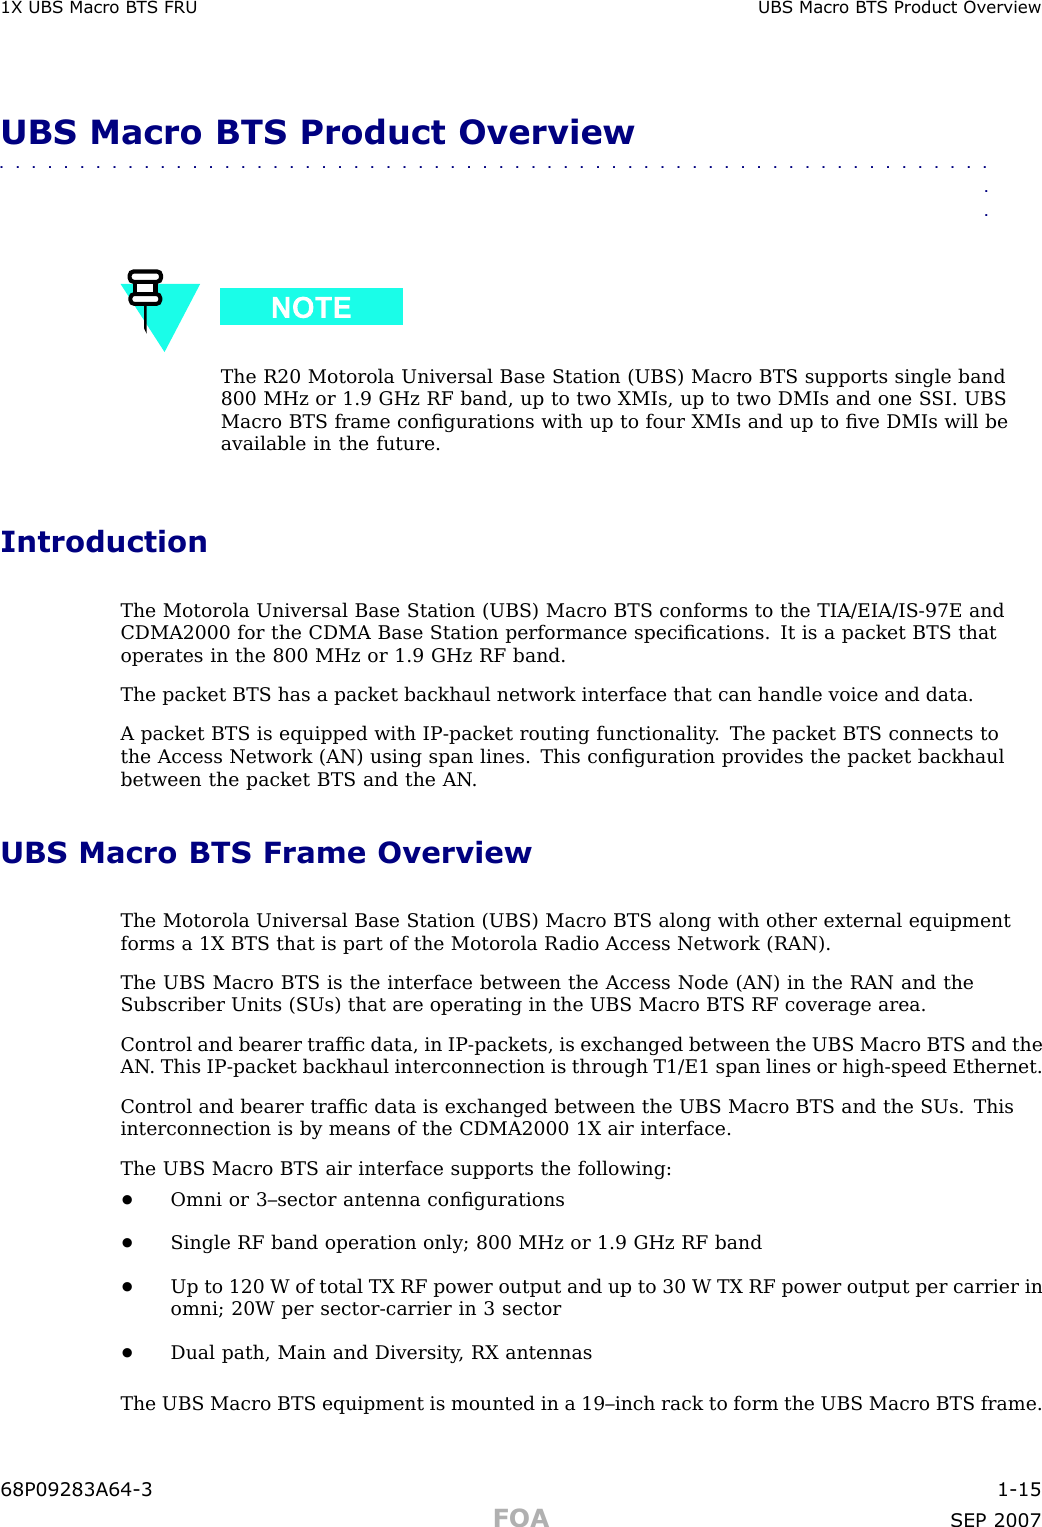 1X UBS Macro B T S FRU UBS Macro B T S Product Ov erviewUBS Macro BTS Product Overview■■■■■■■■■■■■■■■■■■■■■■■■■■■■■■■■■■■■■■■■■■■■■■■■■■■■■■■■■■■■■■■■The R20 Motorola Universal Base Station (UBS) Macro BTS supports single band800 MHz or 1.9 GHz RF band, up to two XMIs, up to two DMIs and one S SI. UBSMacro BTS frame conﬁgurations with up to four XMIs and up to ﬁve DMIs will beavailable in the future.IntroductionThe Motorola Universal Base Station (UBS) Macro BTS conforms to the TIA/EIA/IS -97E andCDMA2000 for the CDMA Base Station performance speciﬁcations. It is a packet BTS thatoperates in the 800 MHz or 1.9 GHz RF band.The packet BTS has a packet backhaul network interface that can handle voice and data.A packet BTS is equipped with IP -packet routing functionality . The packet BTS connects tothe Access Network (AN) using span lines. This conﬁguration provides the packet backhaulbetween the packet BTS and the AN .UBS Macro BTS Frame OverviewThe Motorola Universal Base Station (UBS) Macro BTS along with other external equipmentforms a 1X BTS that is part of the Motorola R adio Access Network (RAN).The UBS Macro BTS is the interface between the Access Node (AN) in the RAN and theSubscriber Units (SUs) that are operating in the UBS Macro BTS RF coverage area.Control and bearer trafﬁc data, in IP -packets, is exchanged between the UBS Macro BTS and theAN . This IP -packet backhaul interconnection is through T1/E1 span lines or high -speed Ethernet.Control and bearer trafﬁc data is exchanged between the UBS Macro BTS and the SUs. Thisinterconnection is by means of the CDMA2000 1X air interface.The UBS Macro BTS air interface supports the following:•Omni or 3–sector antenna conﬁgurations•Single RF band operation only; 800 MHz or 1.9 GHz RF band•Up to 120 W of total TX RF power output and up to 30 W TX RF power output per carrier inomni; 20W per sector -carrier in 3 sector•Dual path, Main and Diversity , RX antennasThe UBS Macro BTS equipment is mounted in a 19–inch rack to form the UBS Macro BTS frame.68P09283A64 -3 1 -15FOA SEP 2007